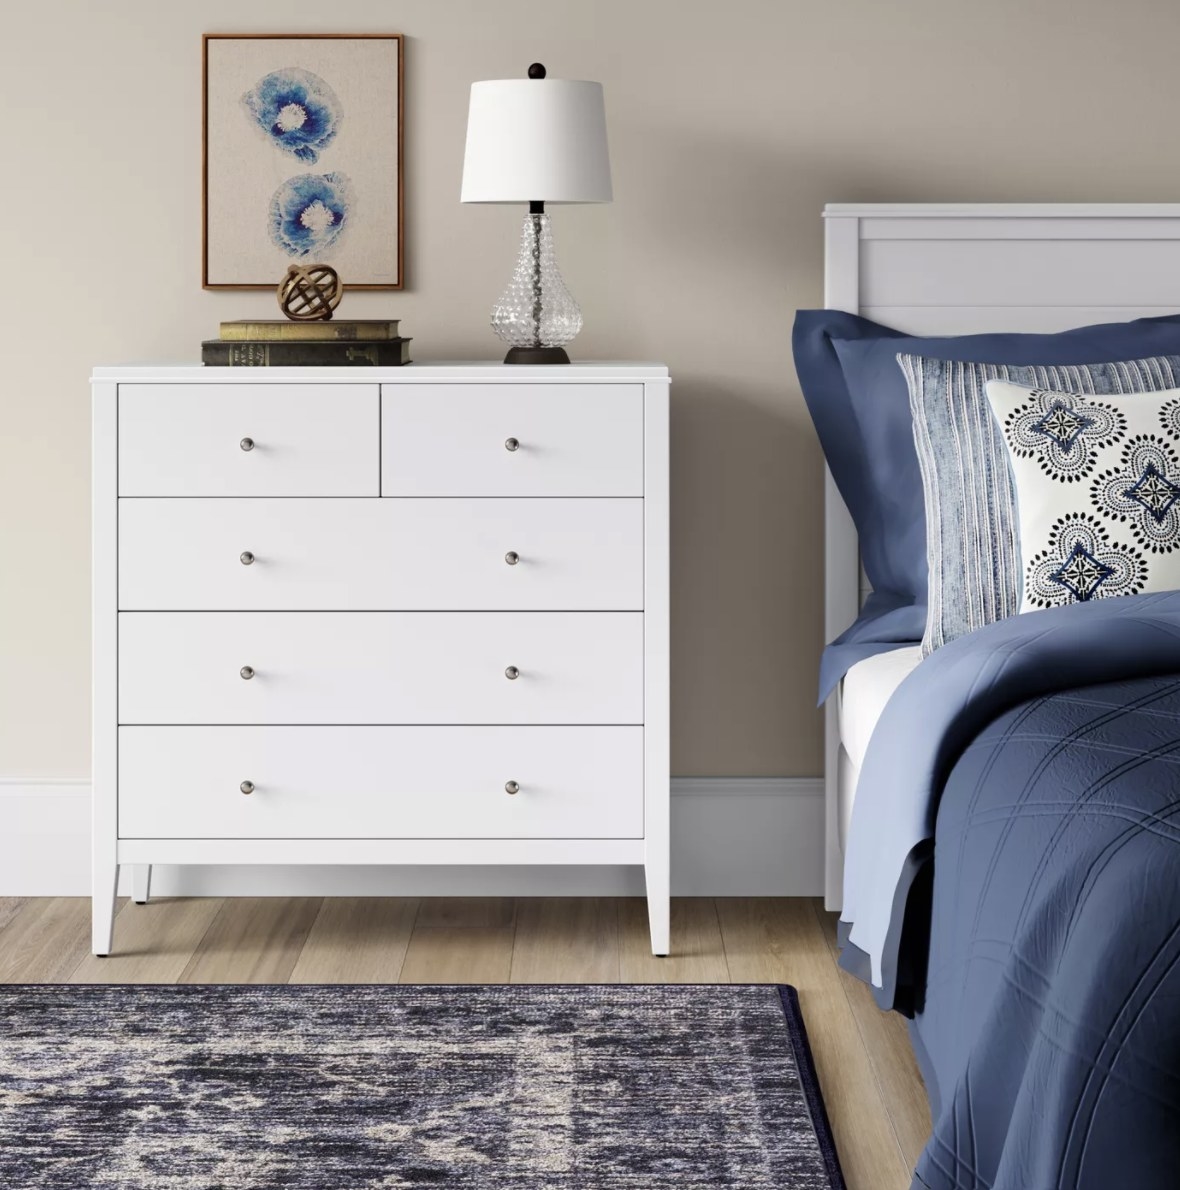 The vertical white dresser has three long rectangular shelves and two smaller rectangular ones at the top